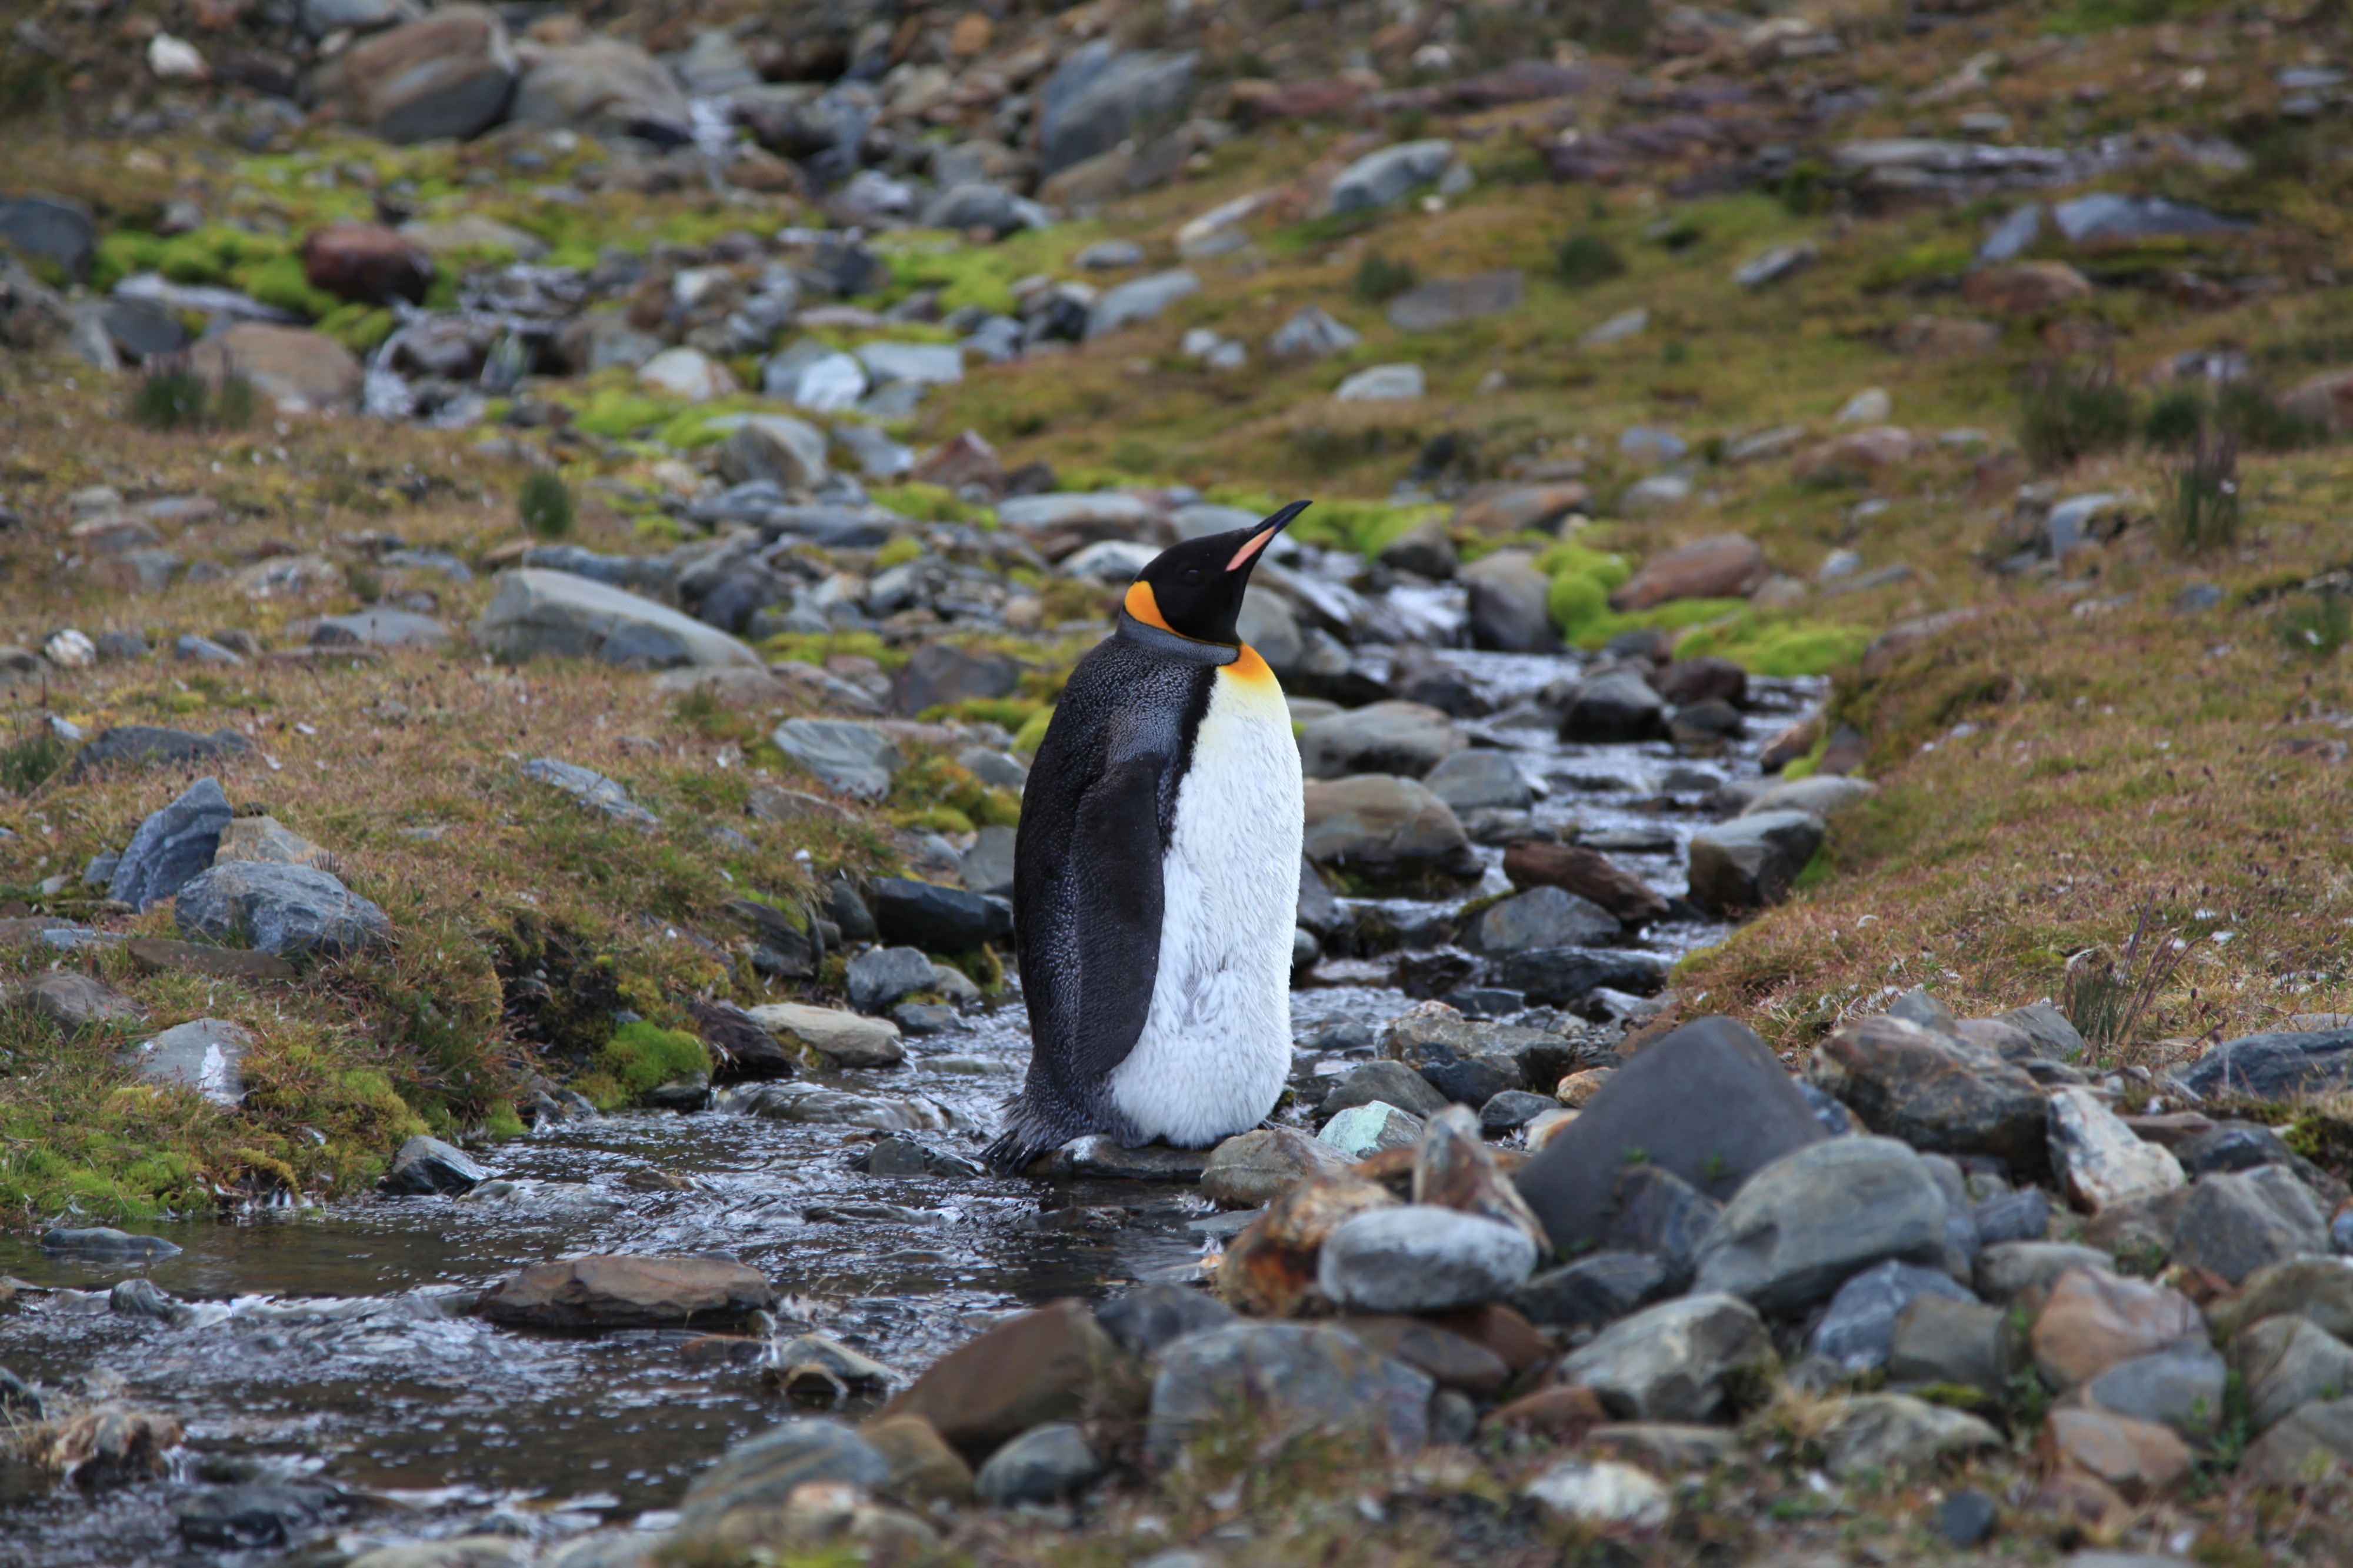 Moulting King Penguin at St. Andrews Bay, South Georgia (5817112778)